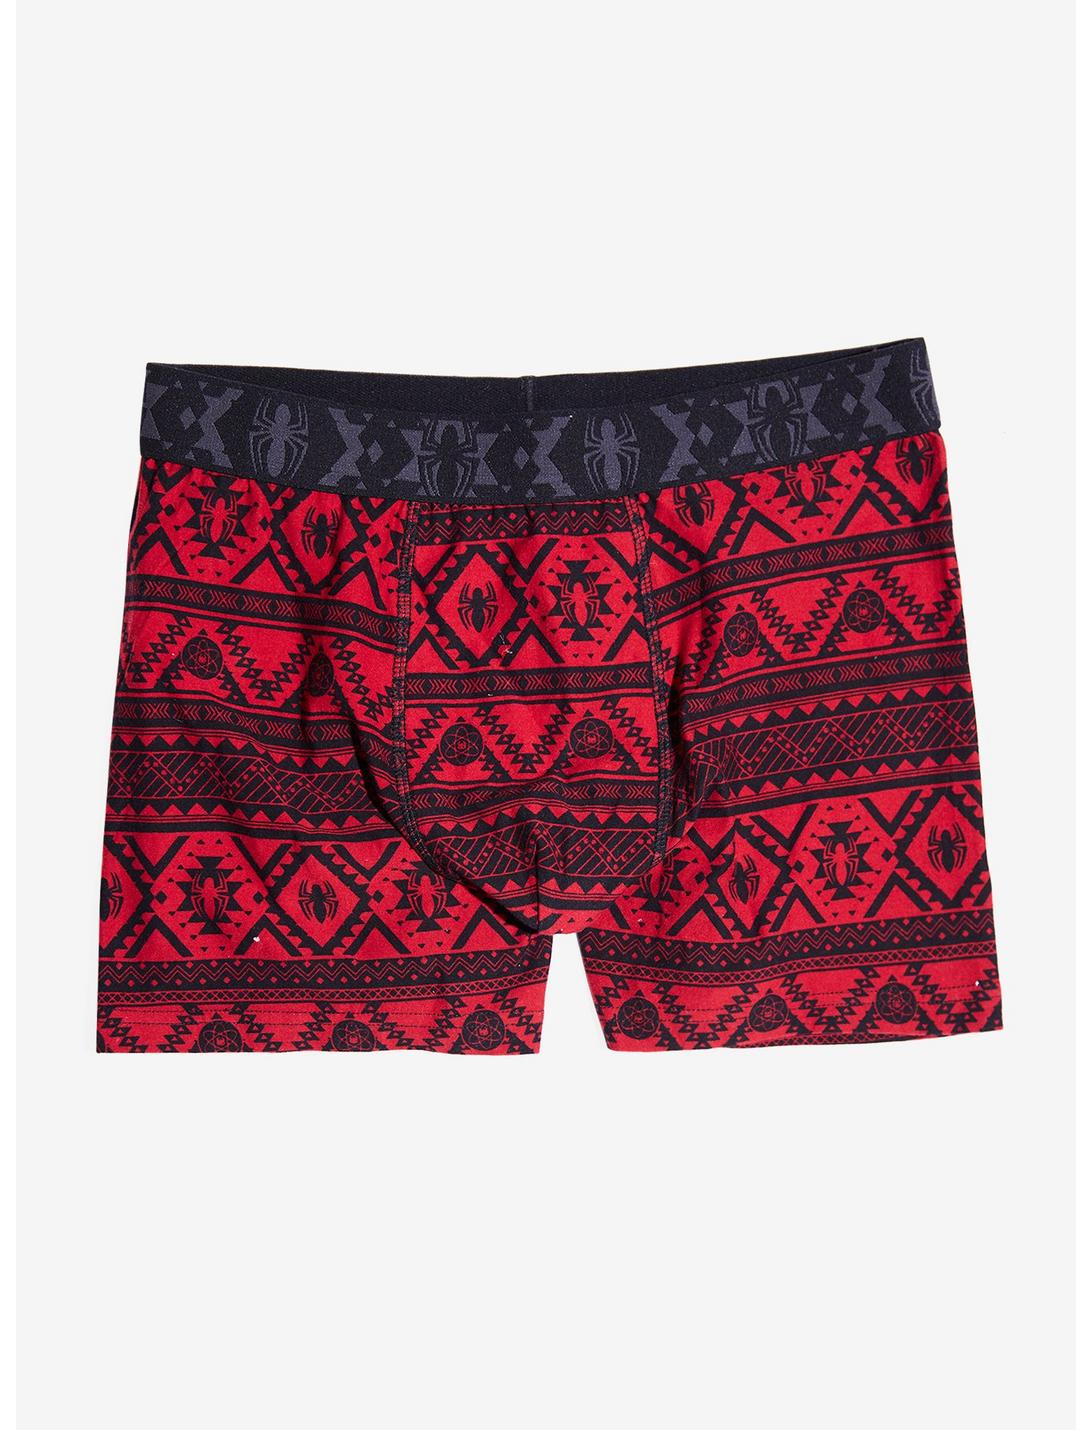 Marvel Spider-Man Boxer Briefs - BoxLunch Exclusive, RED, hi-res